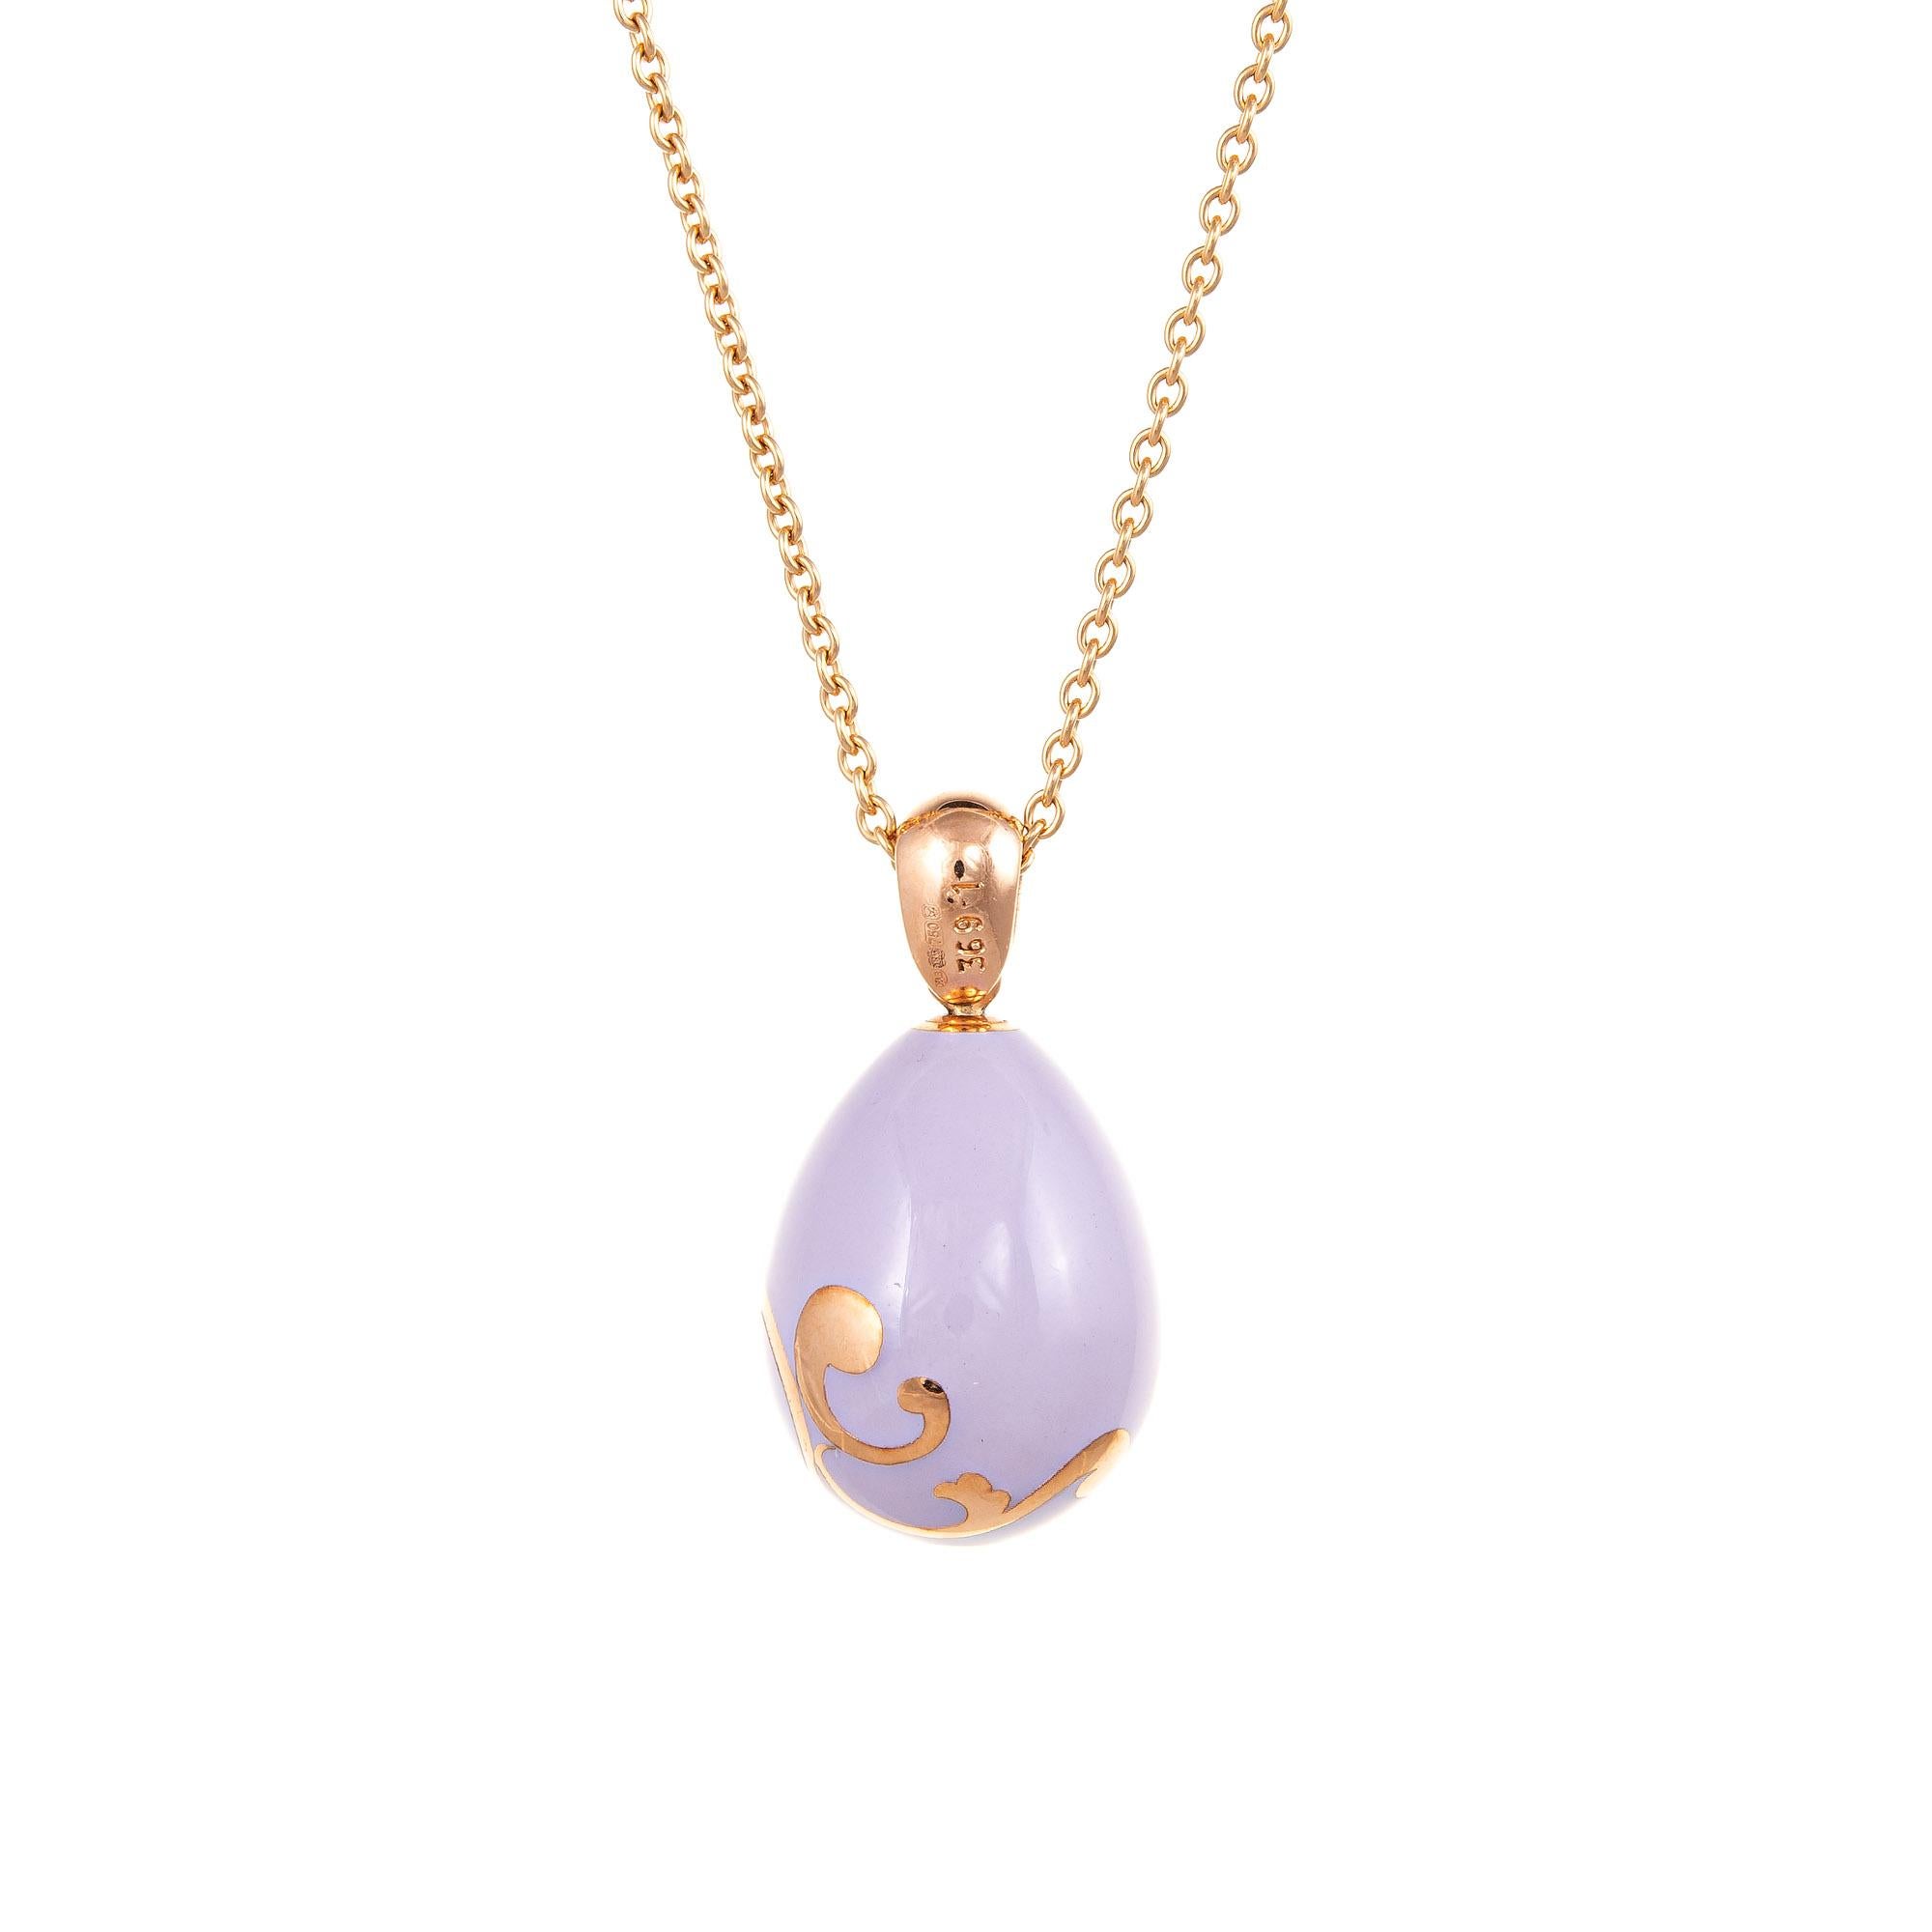 Elegant and finely detailed estate Faberge lilac egg pendant & necklace crafted in 18 karat rose gold.  

The egg features lilac enamel (in excellent condition and free of cracks or chips).  

From the Heritage Collection the egg draws inspiration